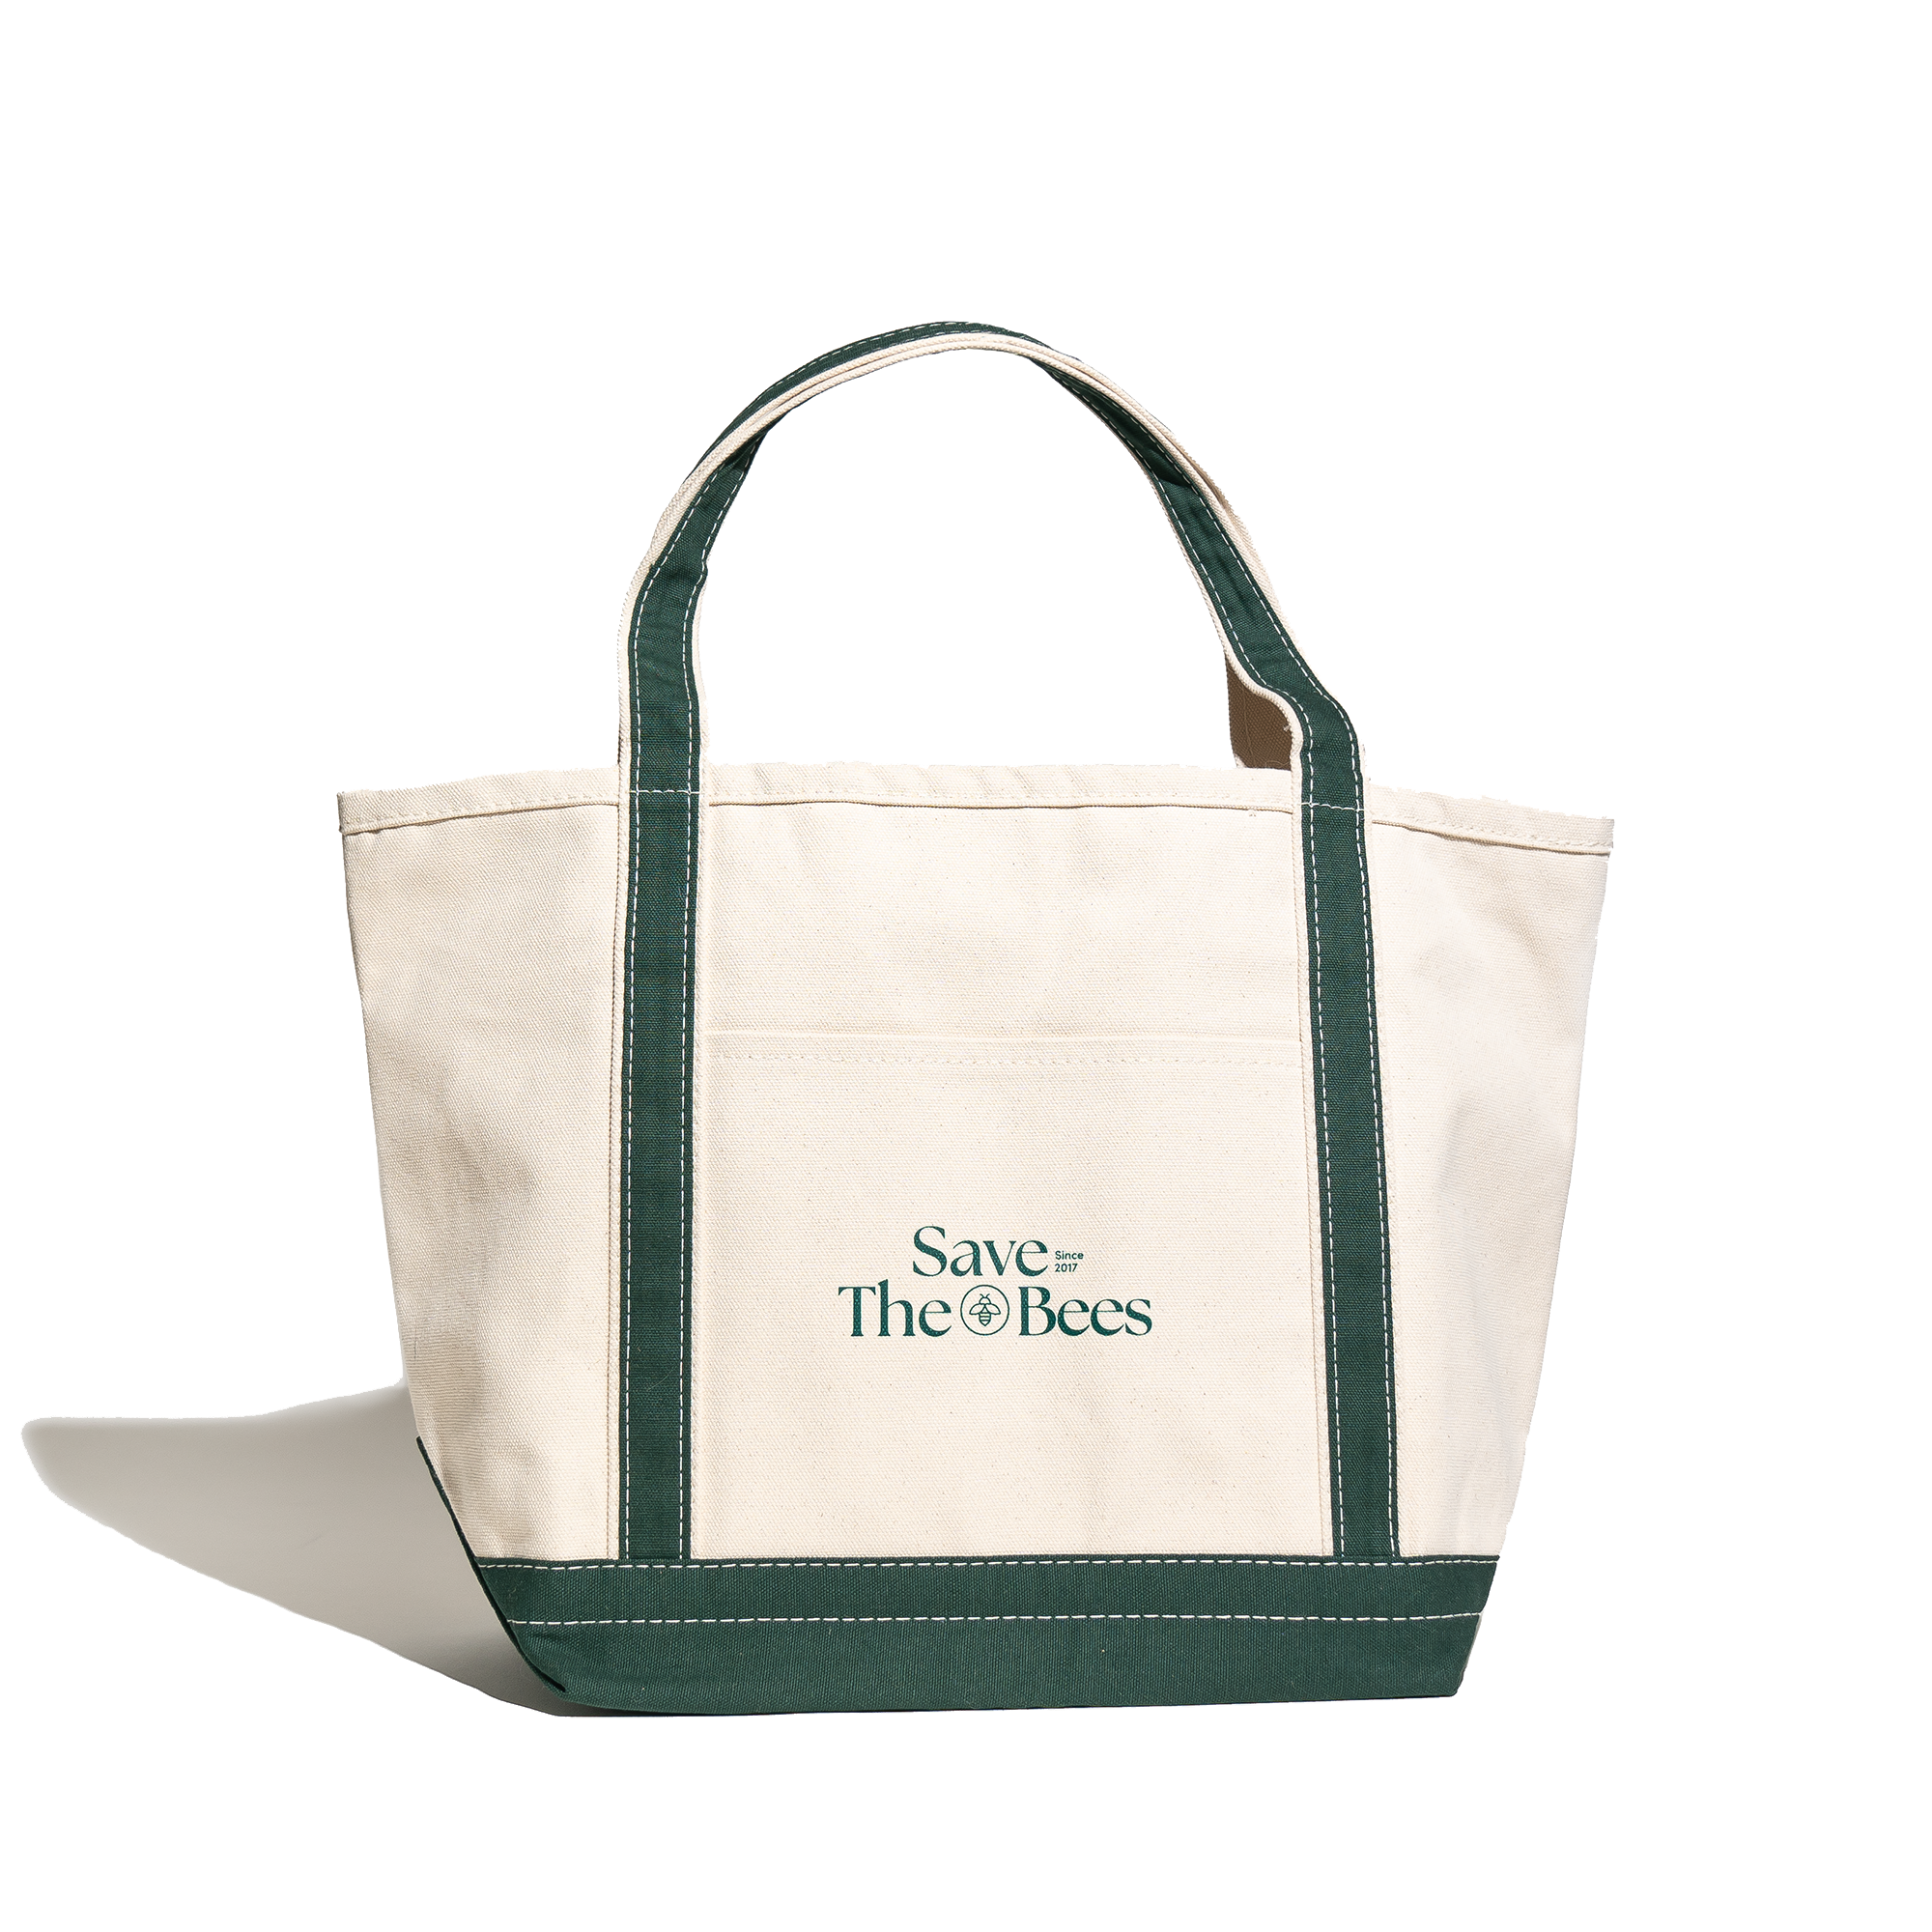 Save The Bees Tote